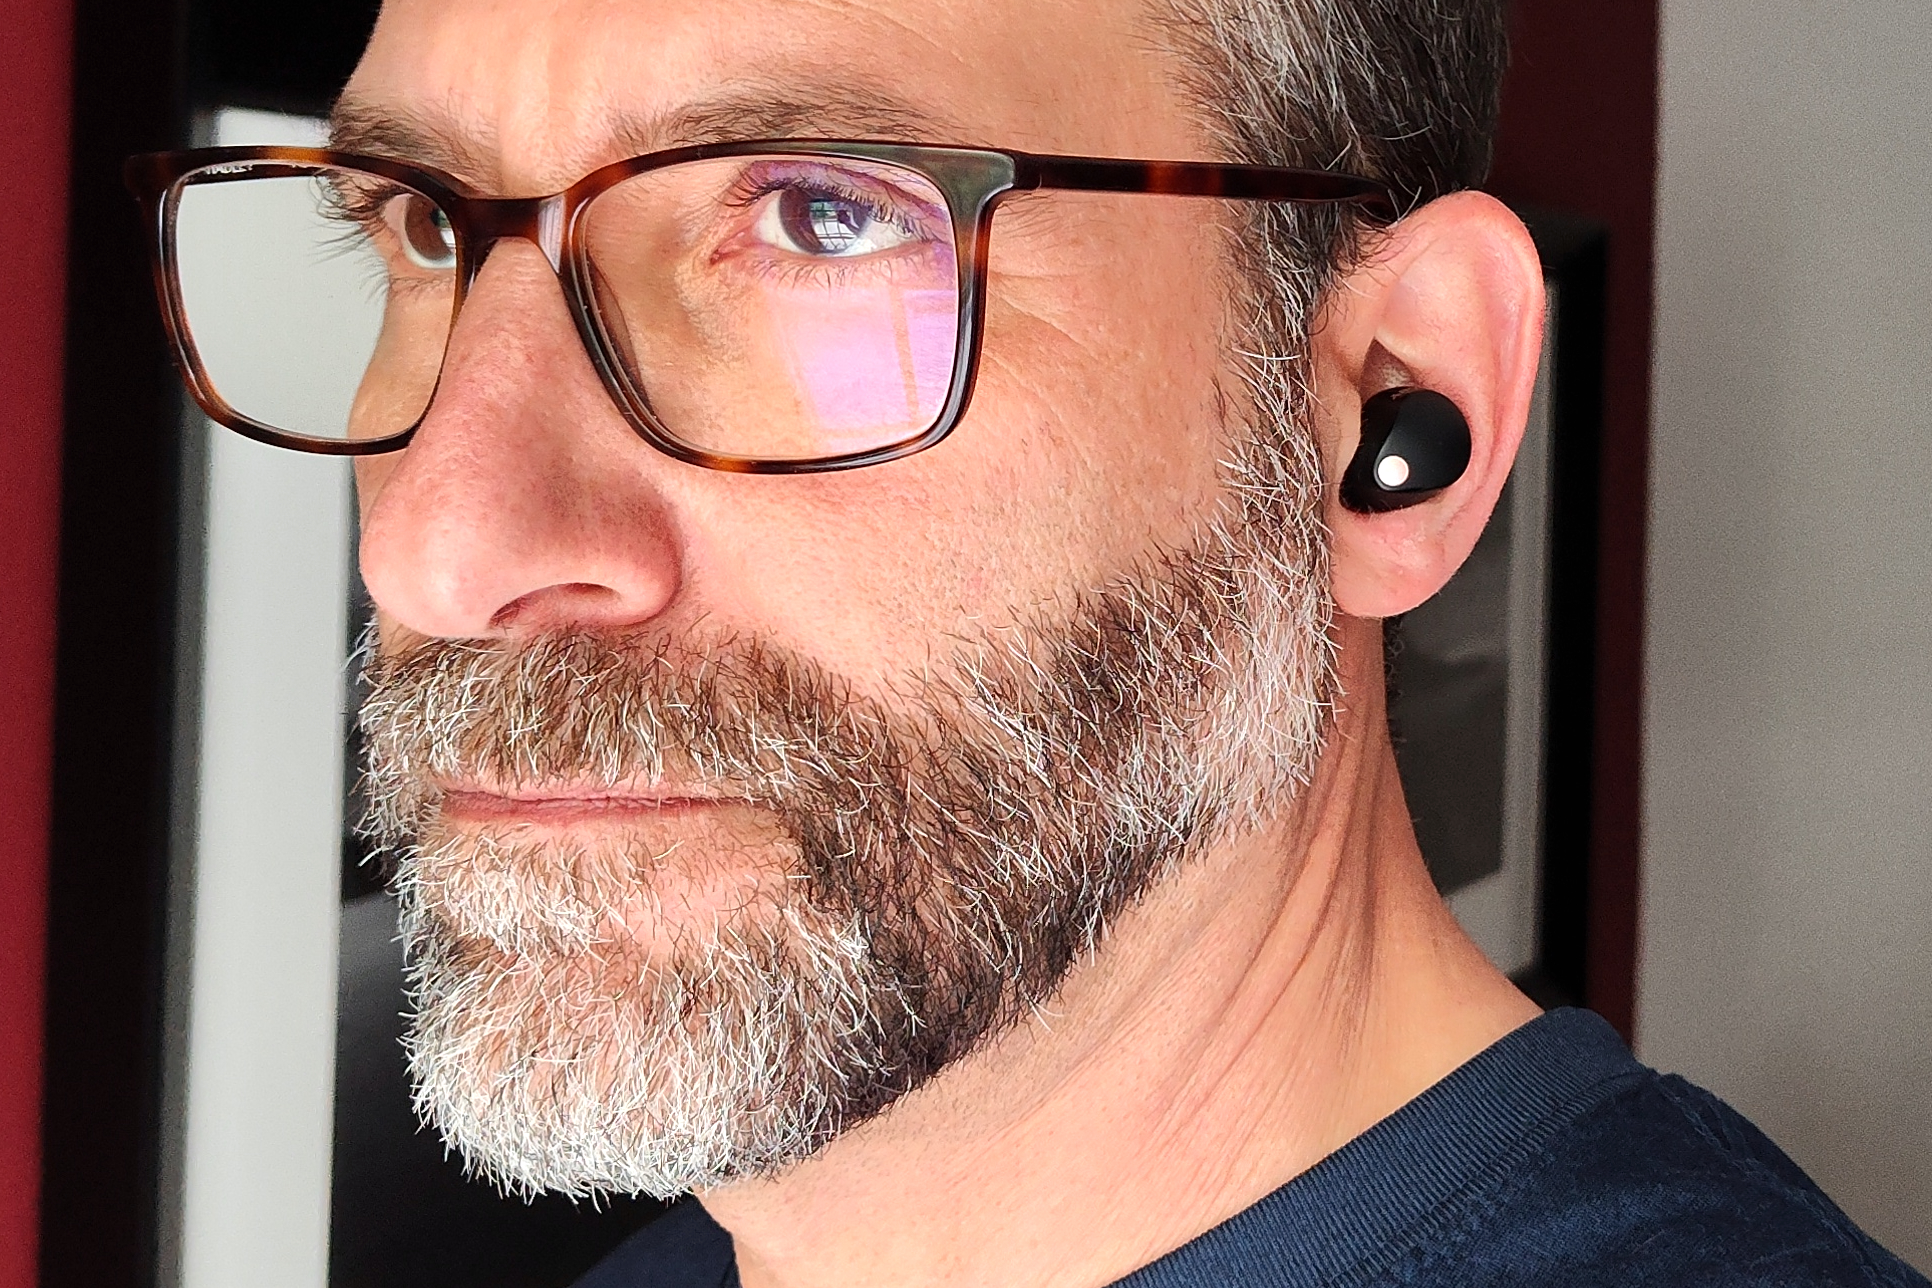 Sony WF-1000XM5 review: smaller, better-fitting earbuds are no longer  outright best, Sony